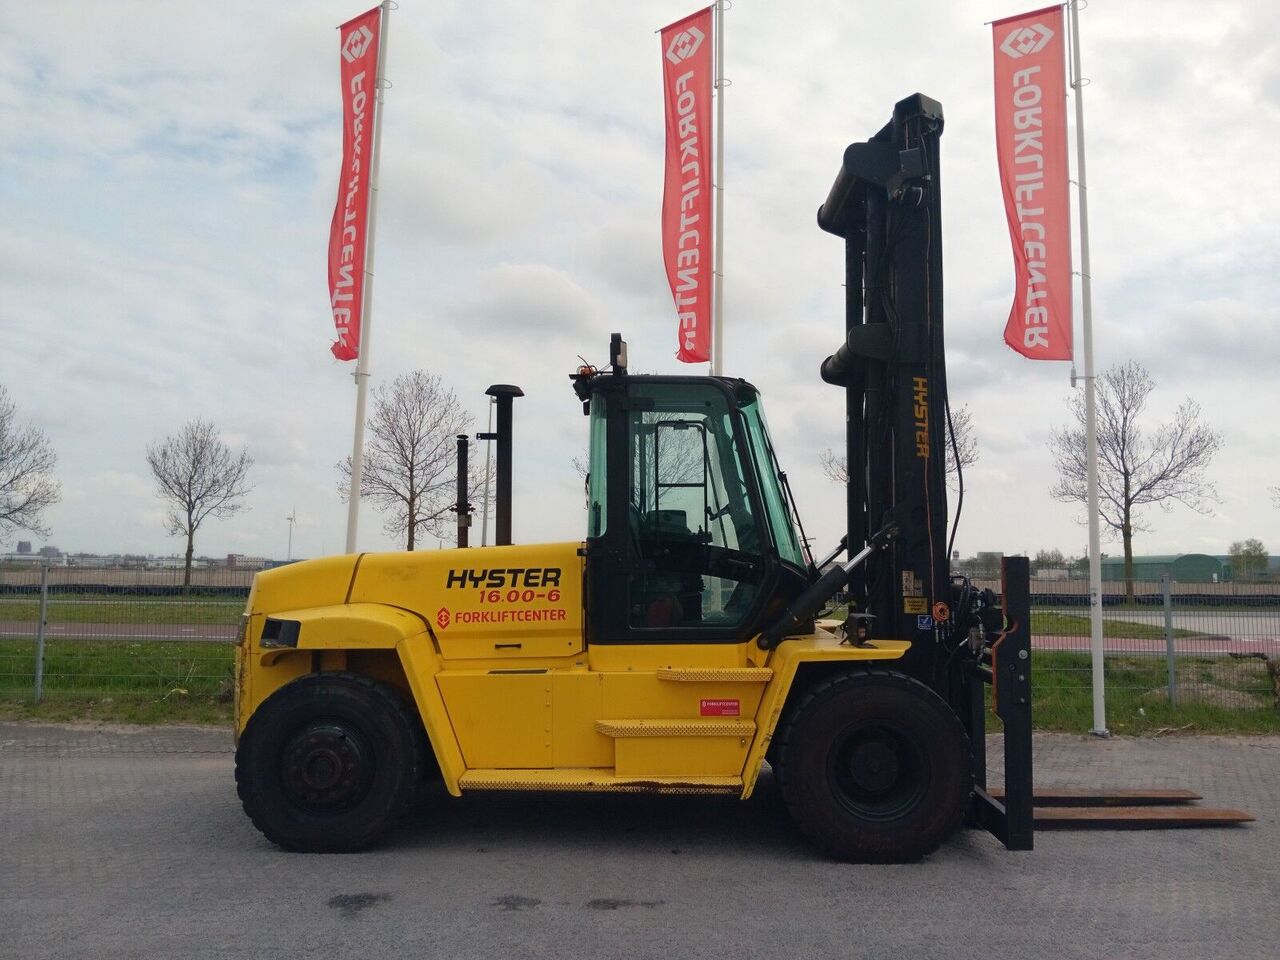 Hyster H16.00XM high capacity forklift